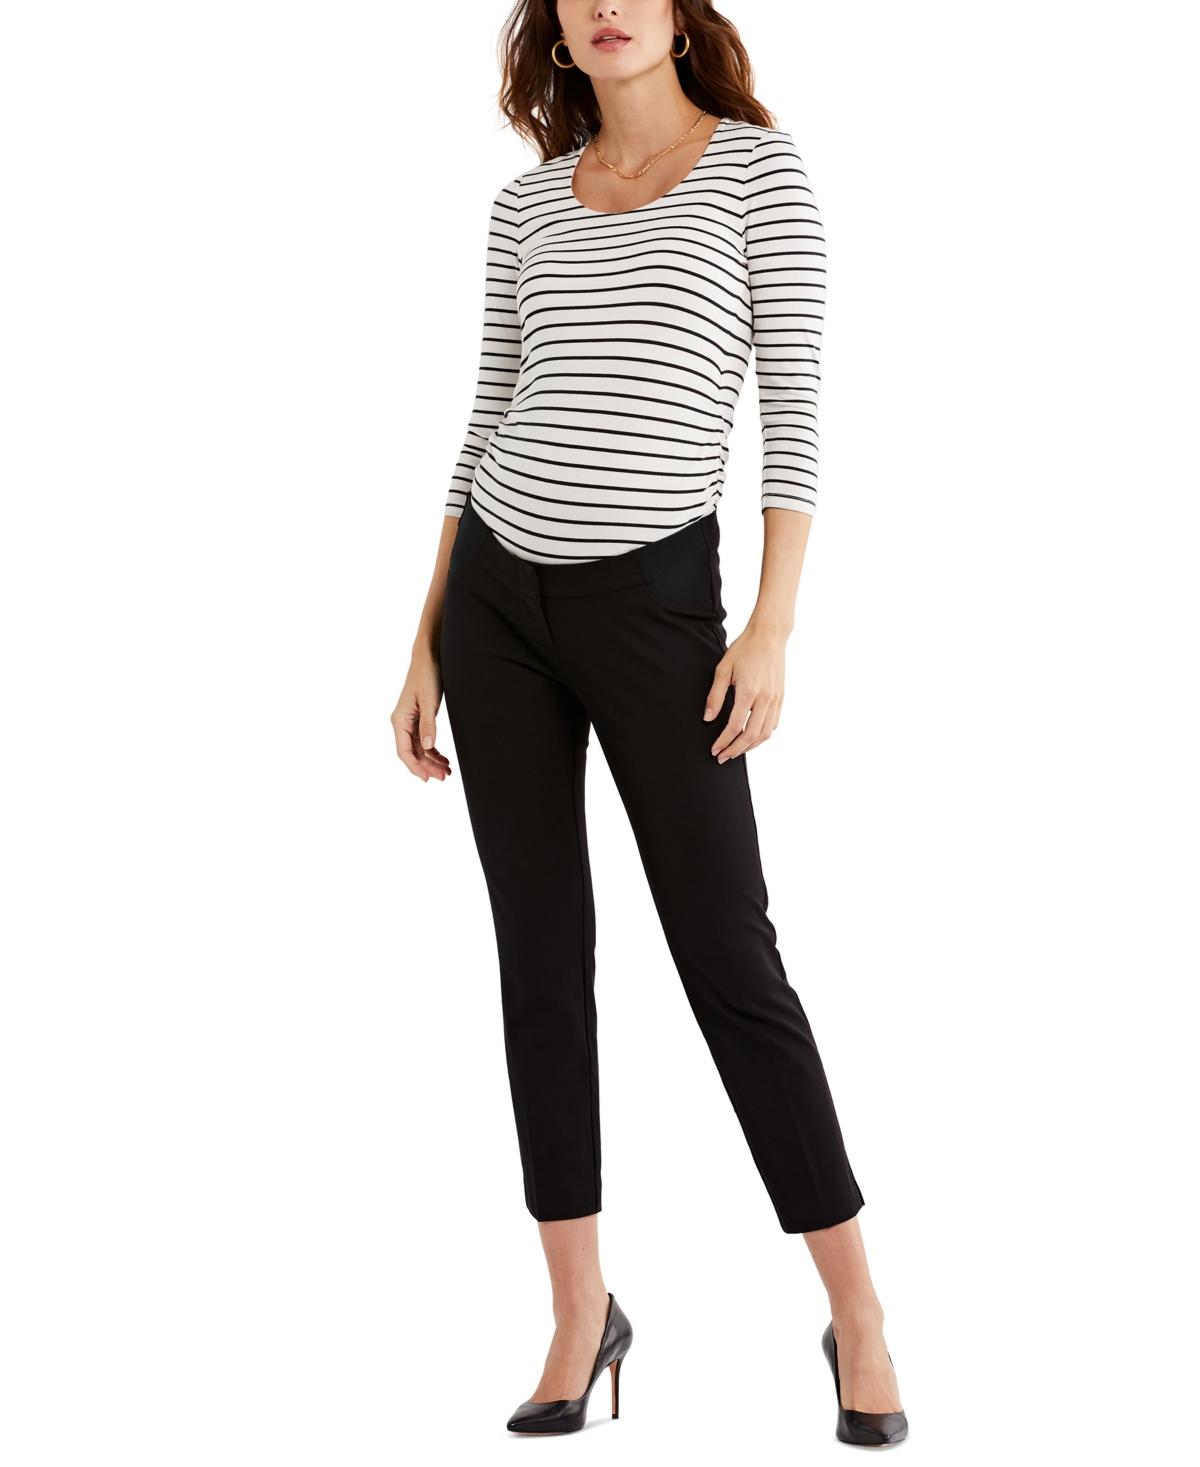 Luxe Side Ruched 3/4 Sleeve Maternity T Shirt - White - Black Stripe